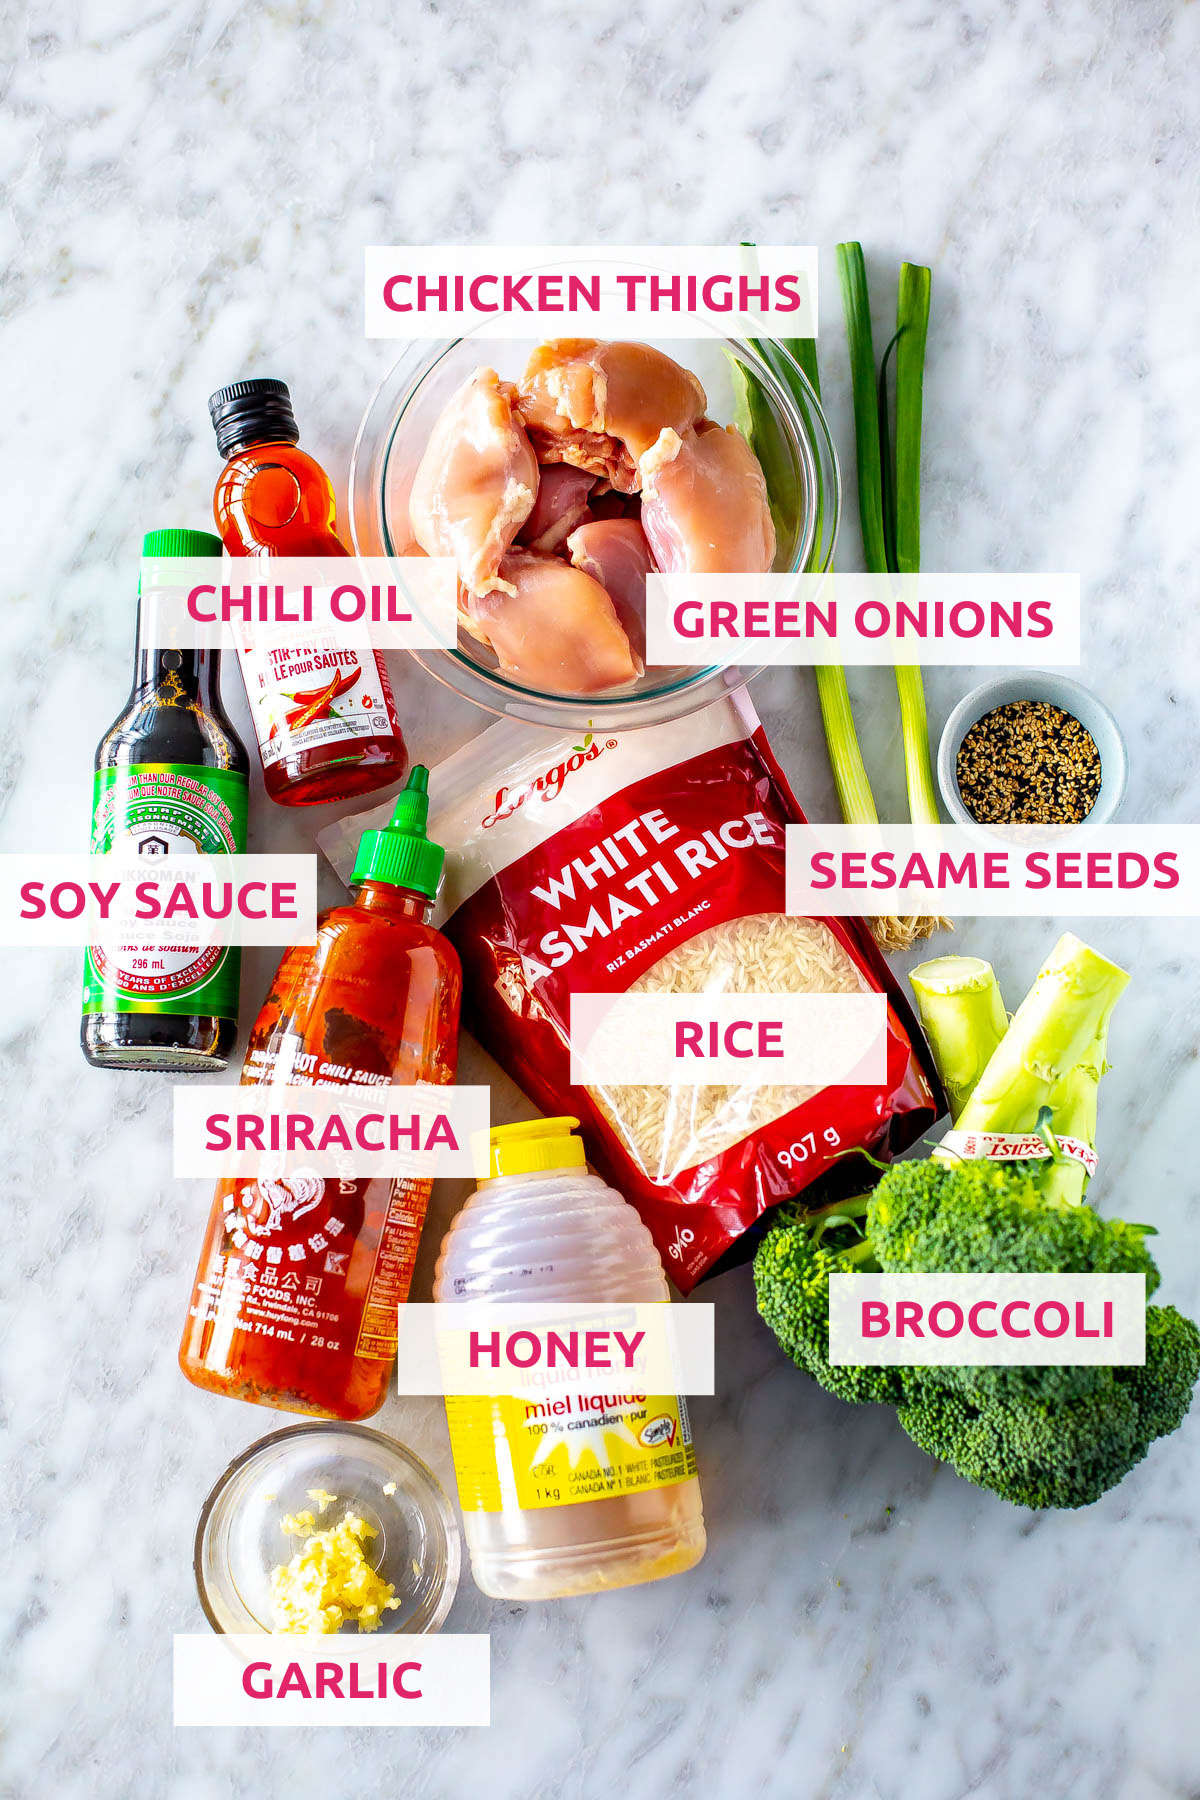 Ingredients for slow cooker chicken thighs: chicken thighs, green onions, sesame seeds, broccoli, sriracha, garlic, honey, chili oil and soy sauce.